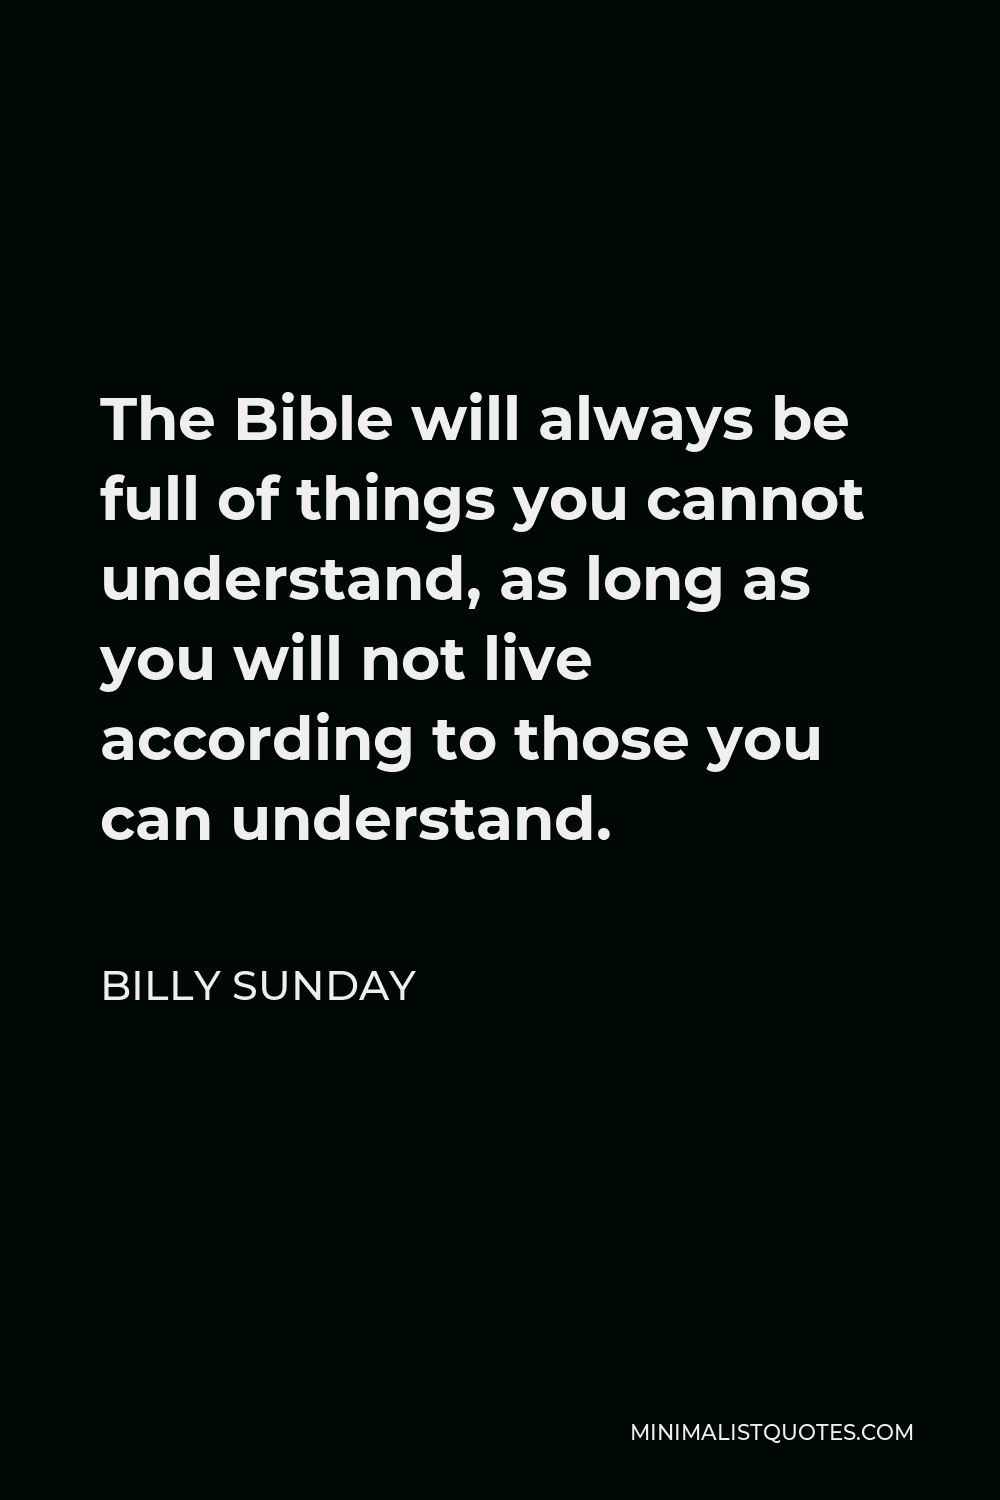 Billy Sunday Quote - The Bible will always be full of things you cannot understand, as long as you will not live according to those you can understand.